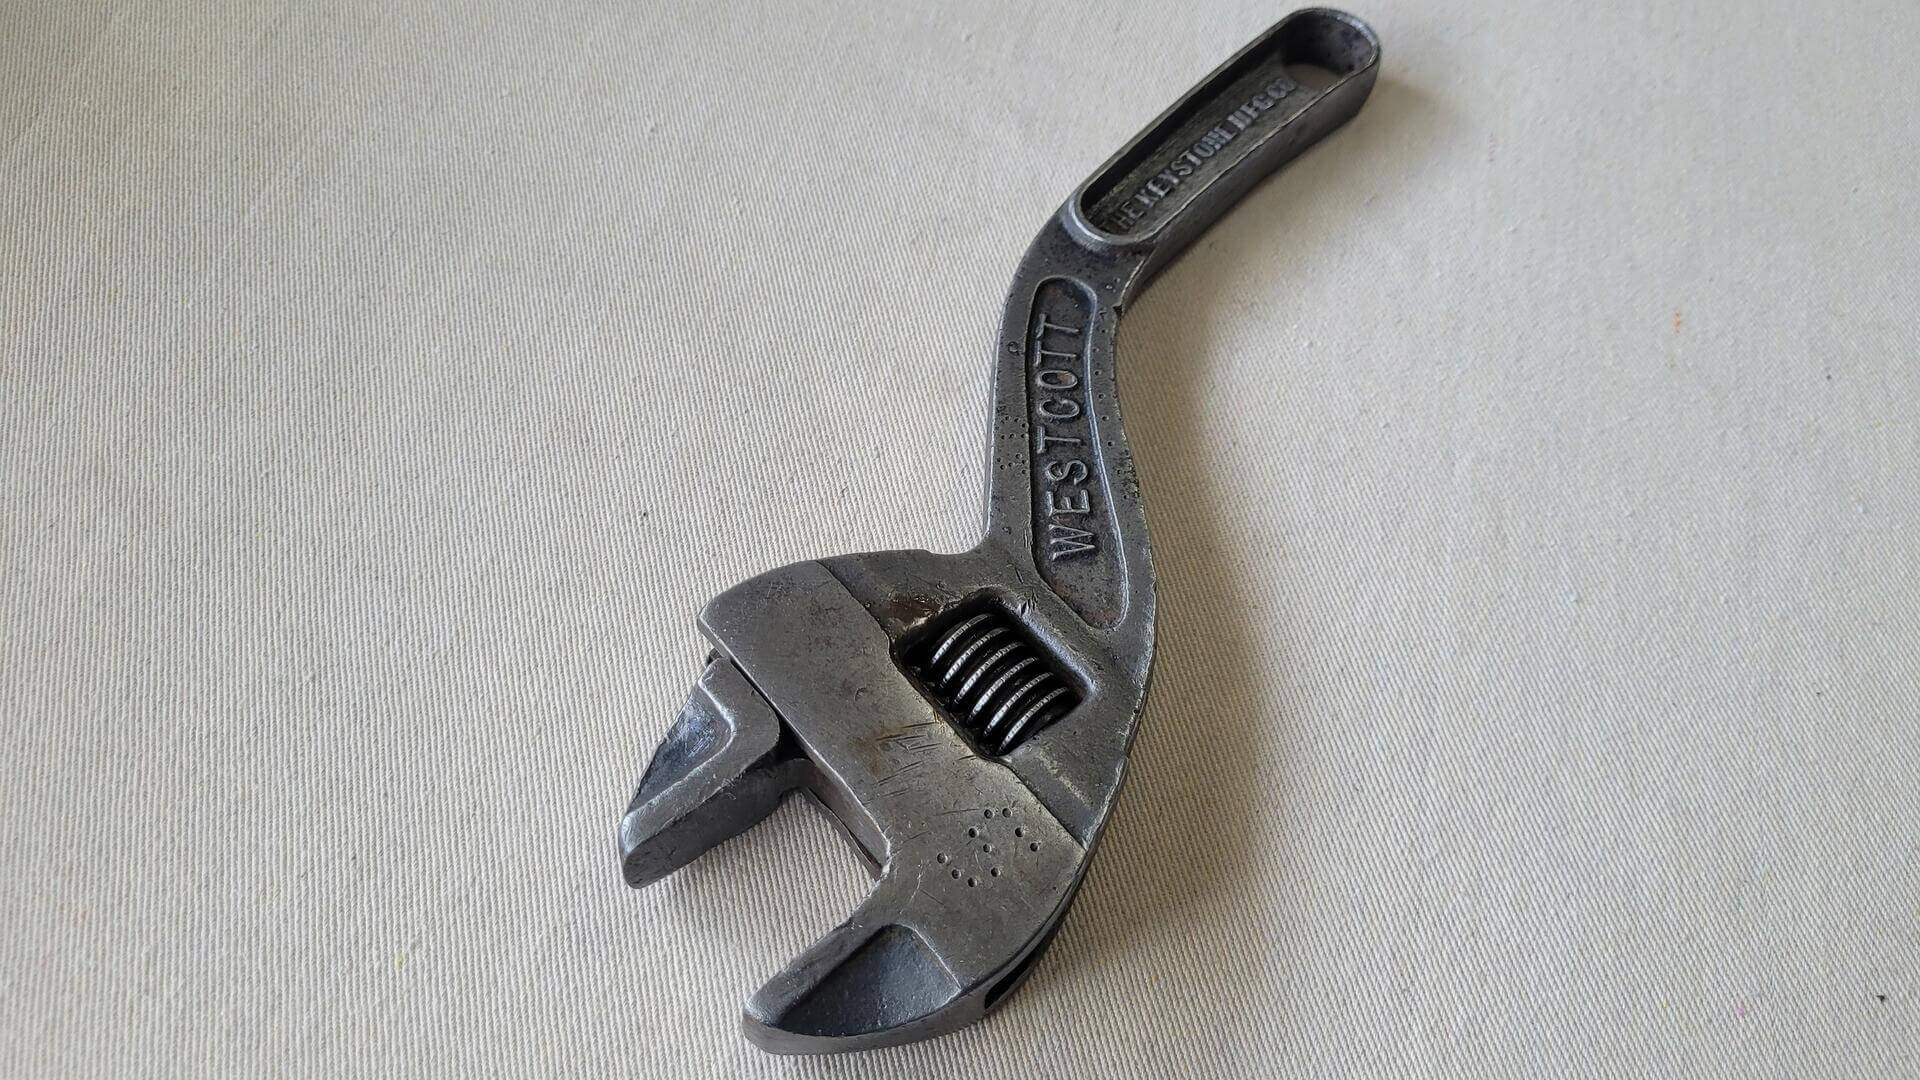 Westcott No. 82 12" adjustable wrench S-curved handle by Keystone Mfg Co. Buffalo, NY. Antique made in USA collectible automotive & machinist hand tools